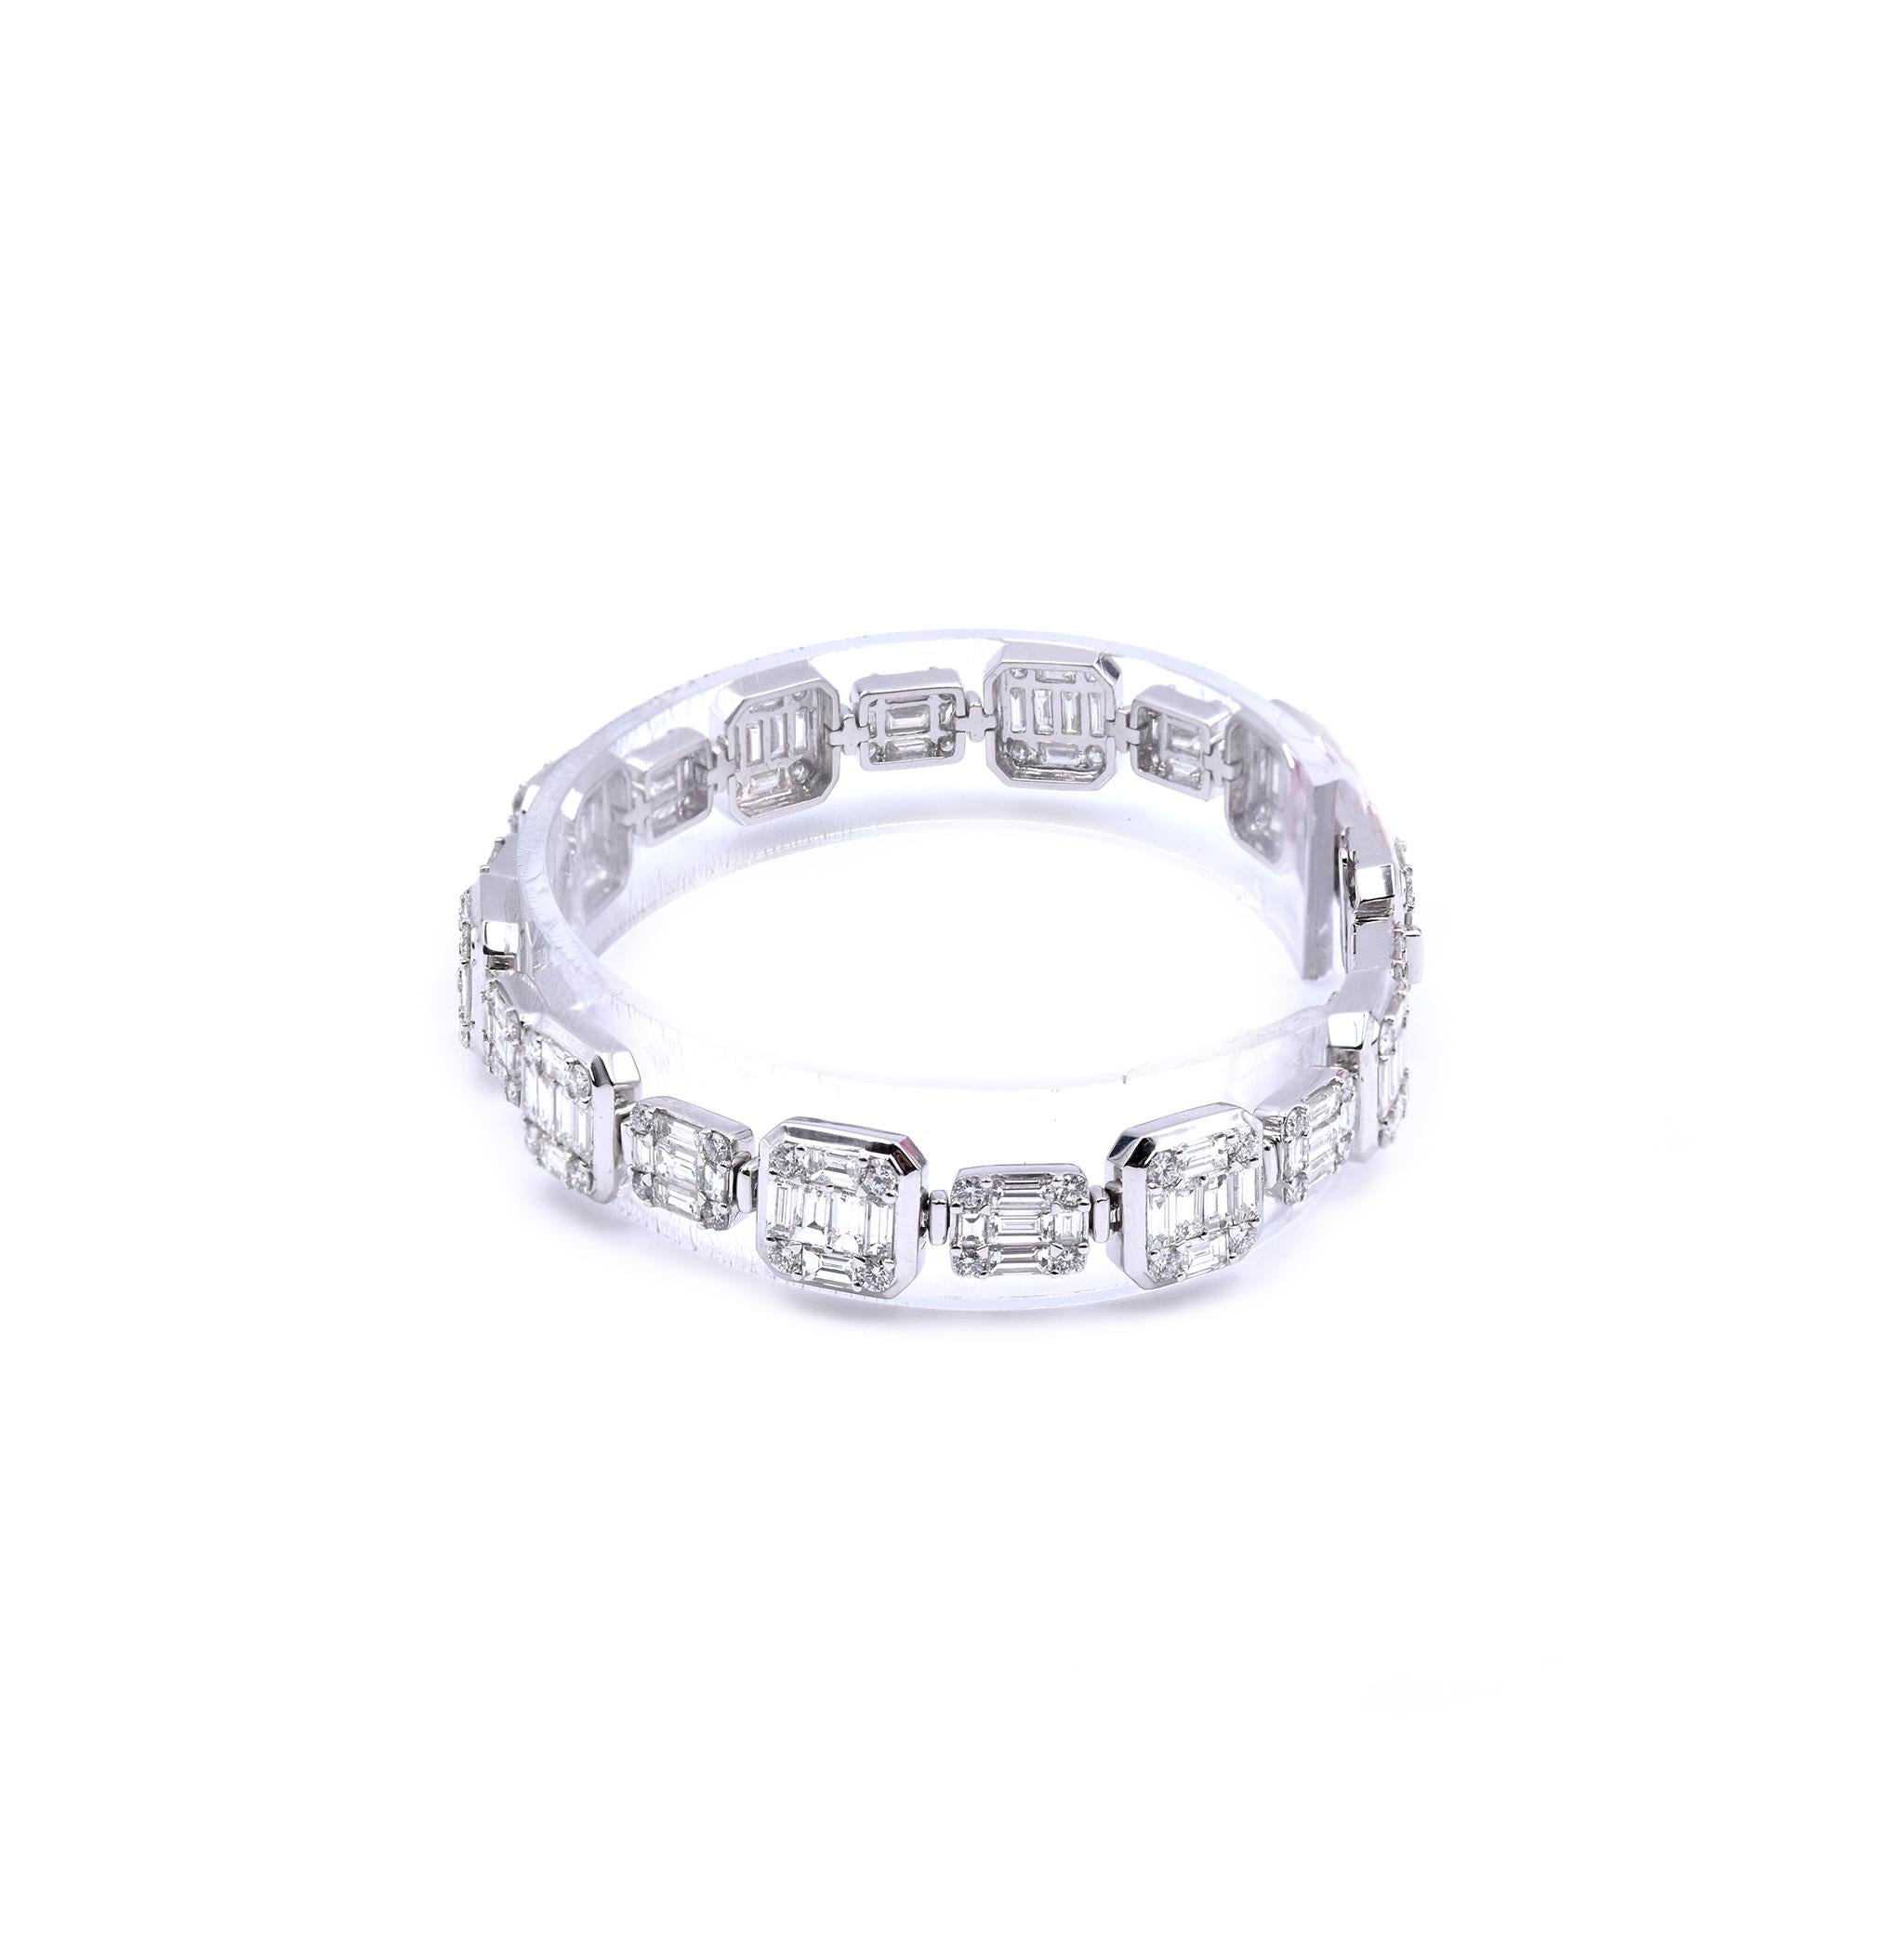 Designer: custom
Material: 18K white gold
Diamonds: 80 round brilliant cut = 1.94cttw
Color: G
Clarity: VS2
Diamonds: 110 baguette cut = 8.25cttw
Color: G
Clarity: VS2
Dimensions: bracelet will fit up to a 7-inch wrist
Weight: 22.26 grams
